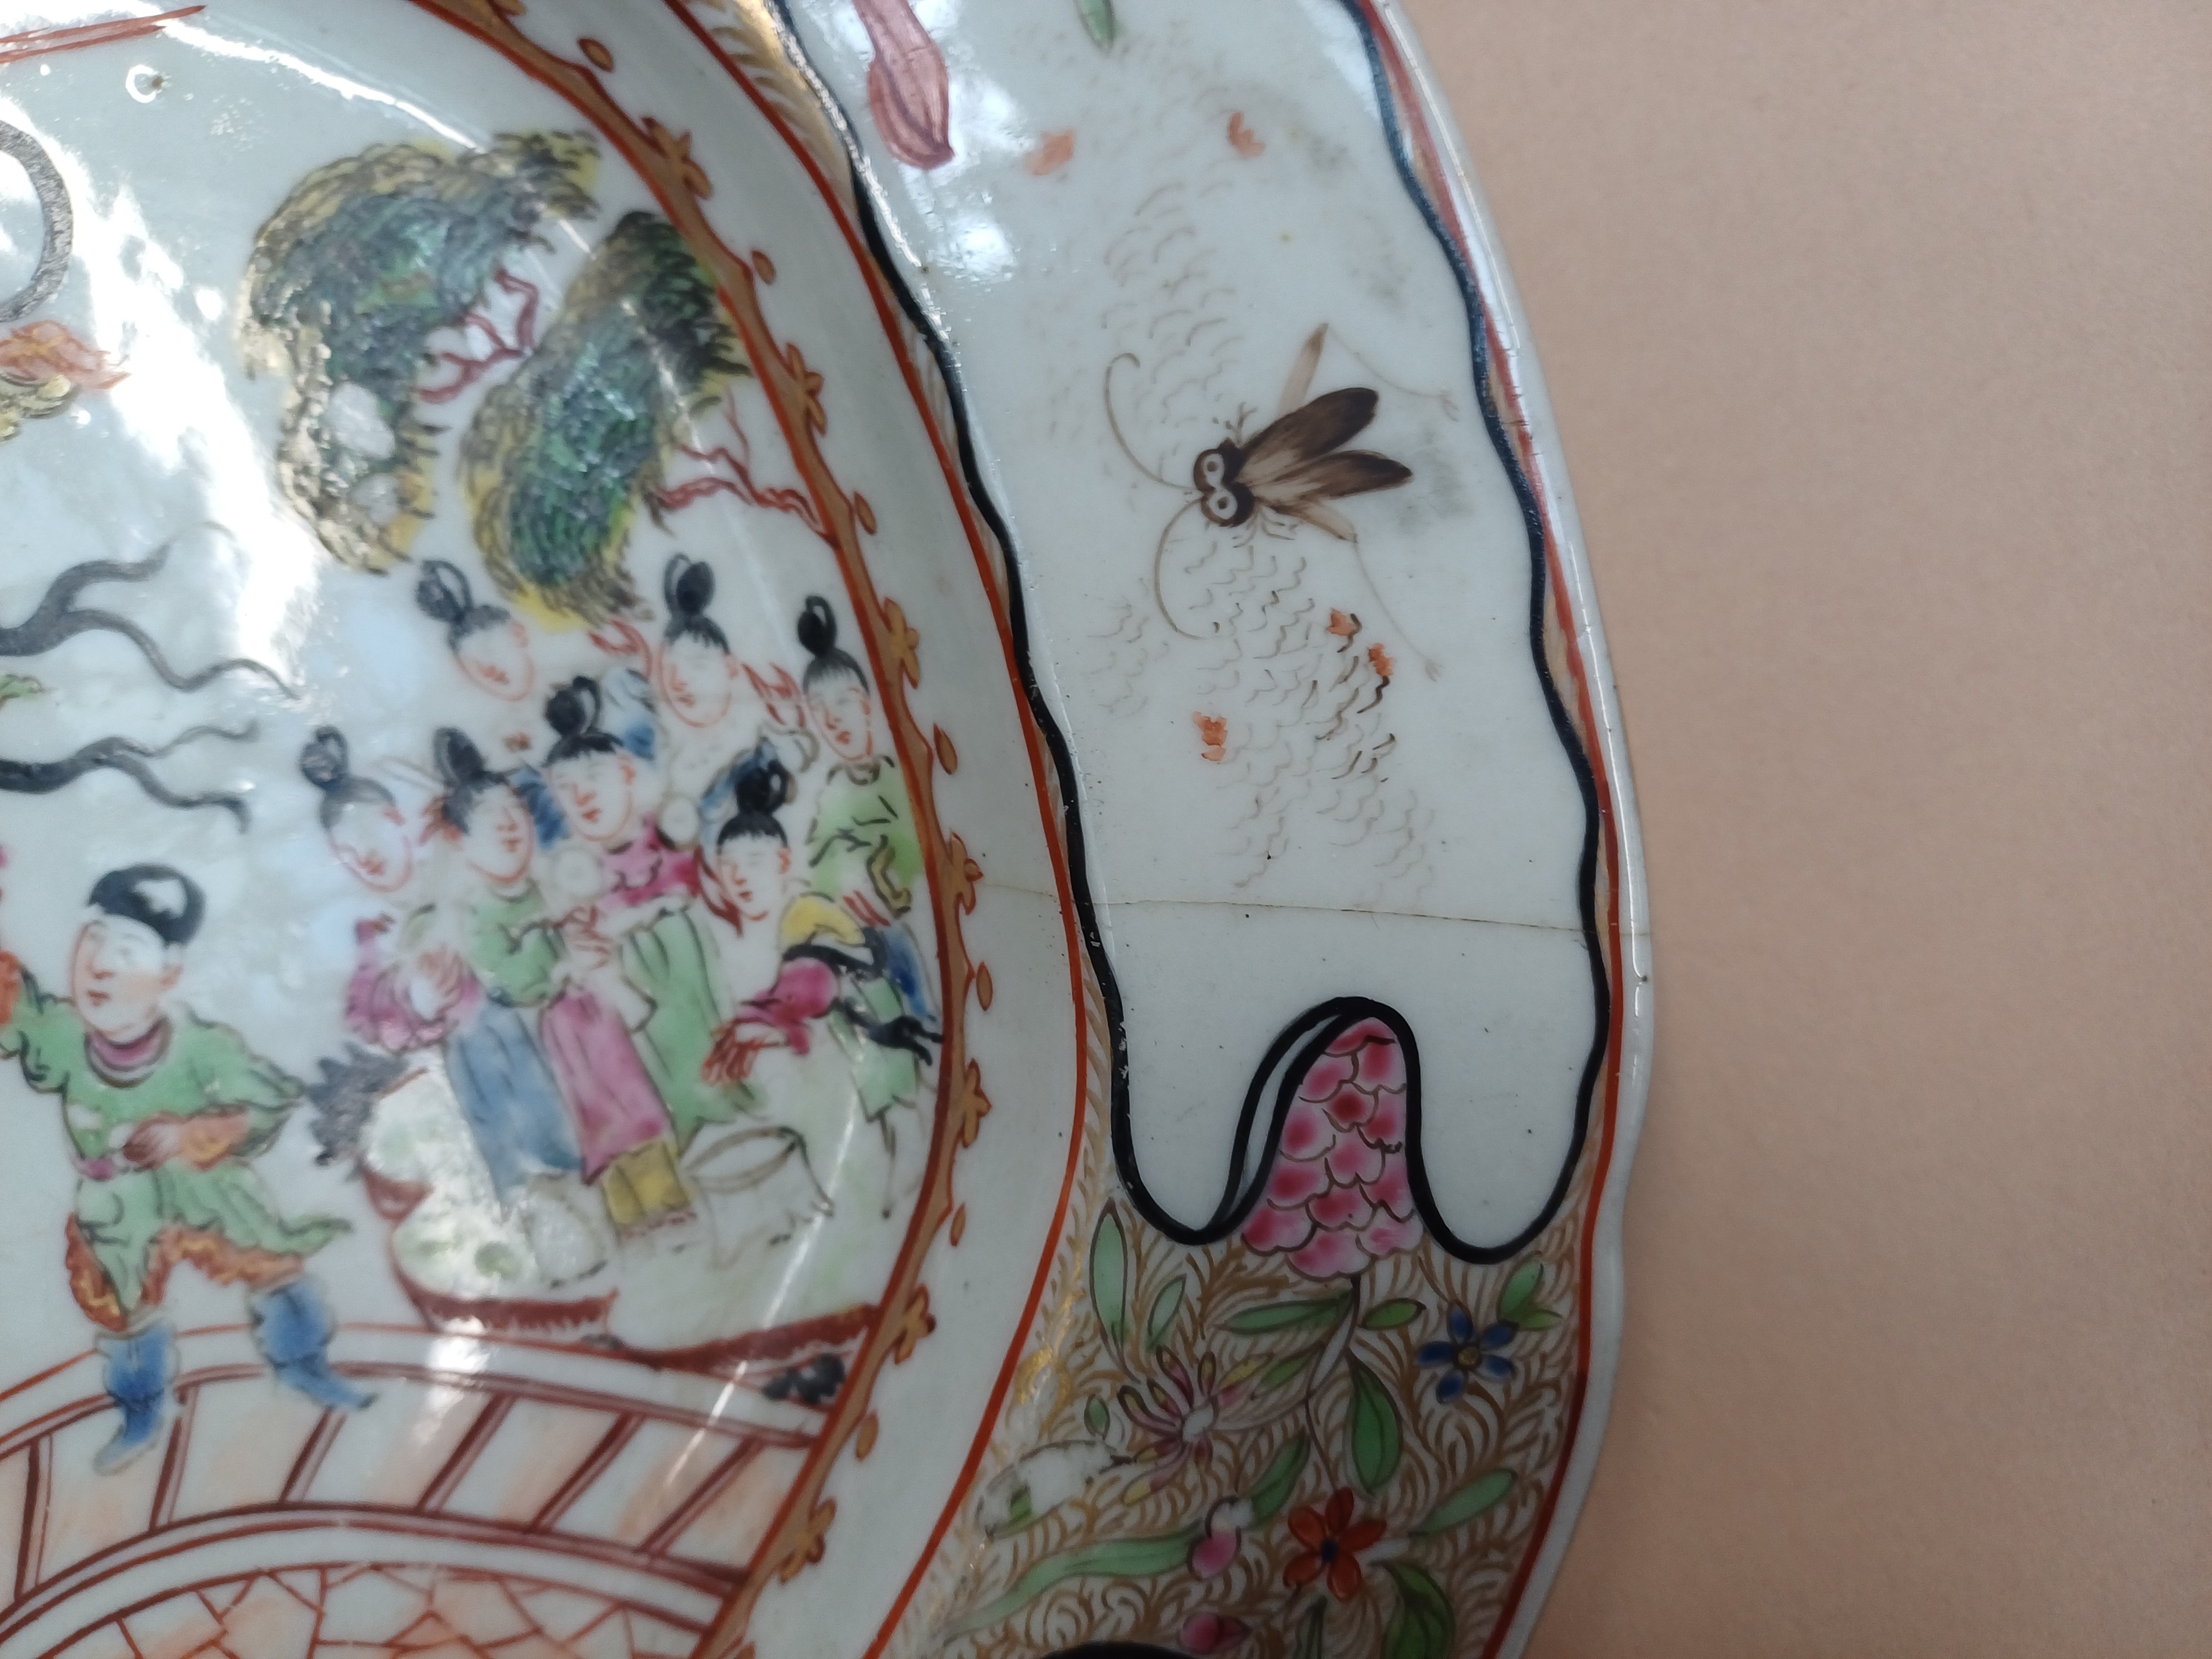 A PAIR OF CHINESE EXPORT FAMILLE-ROSE 'FIGURATIVE' DISHES 清雍正 外銷粉彩人物故事圖紋盤一對 - Image 14 of 18